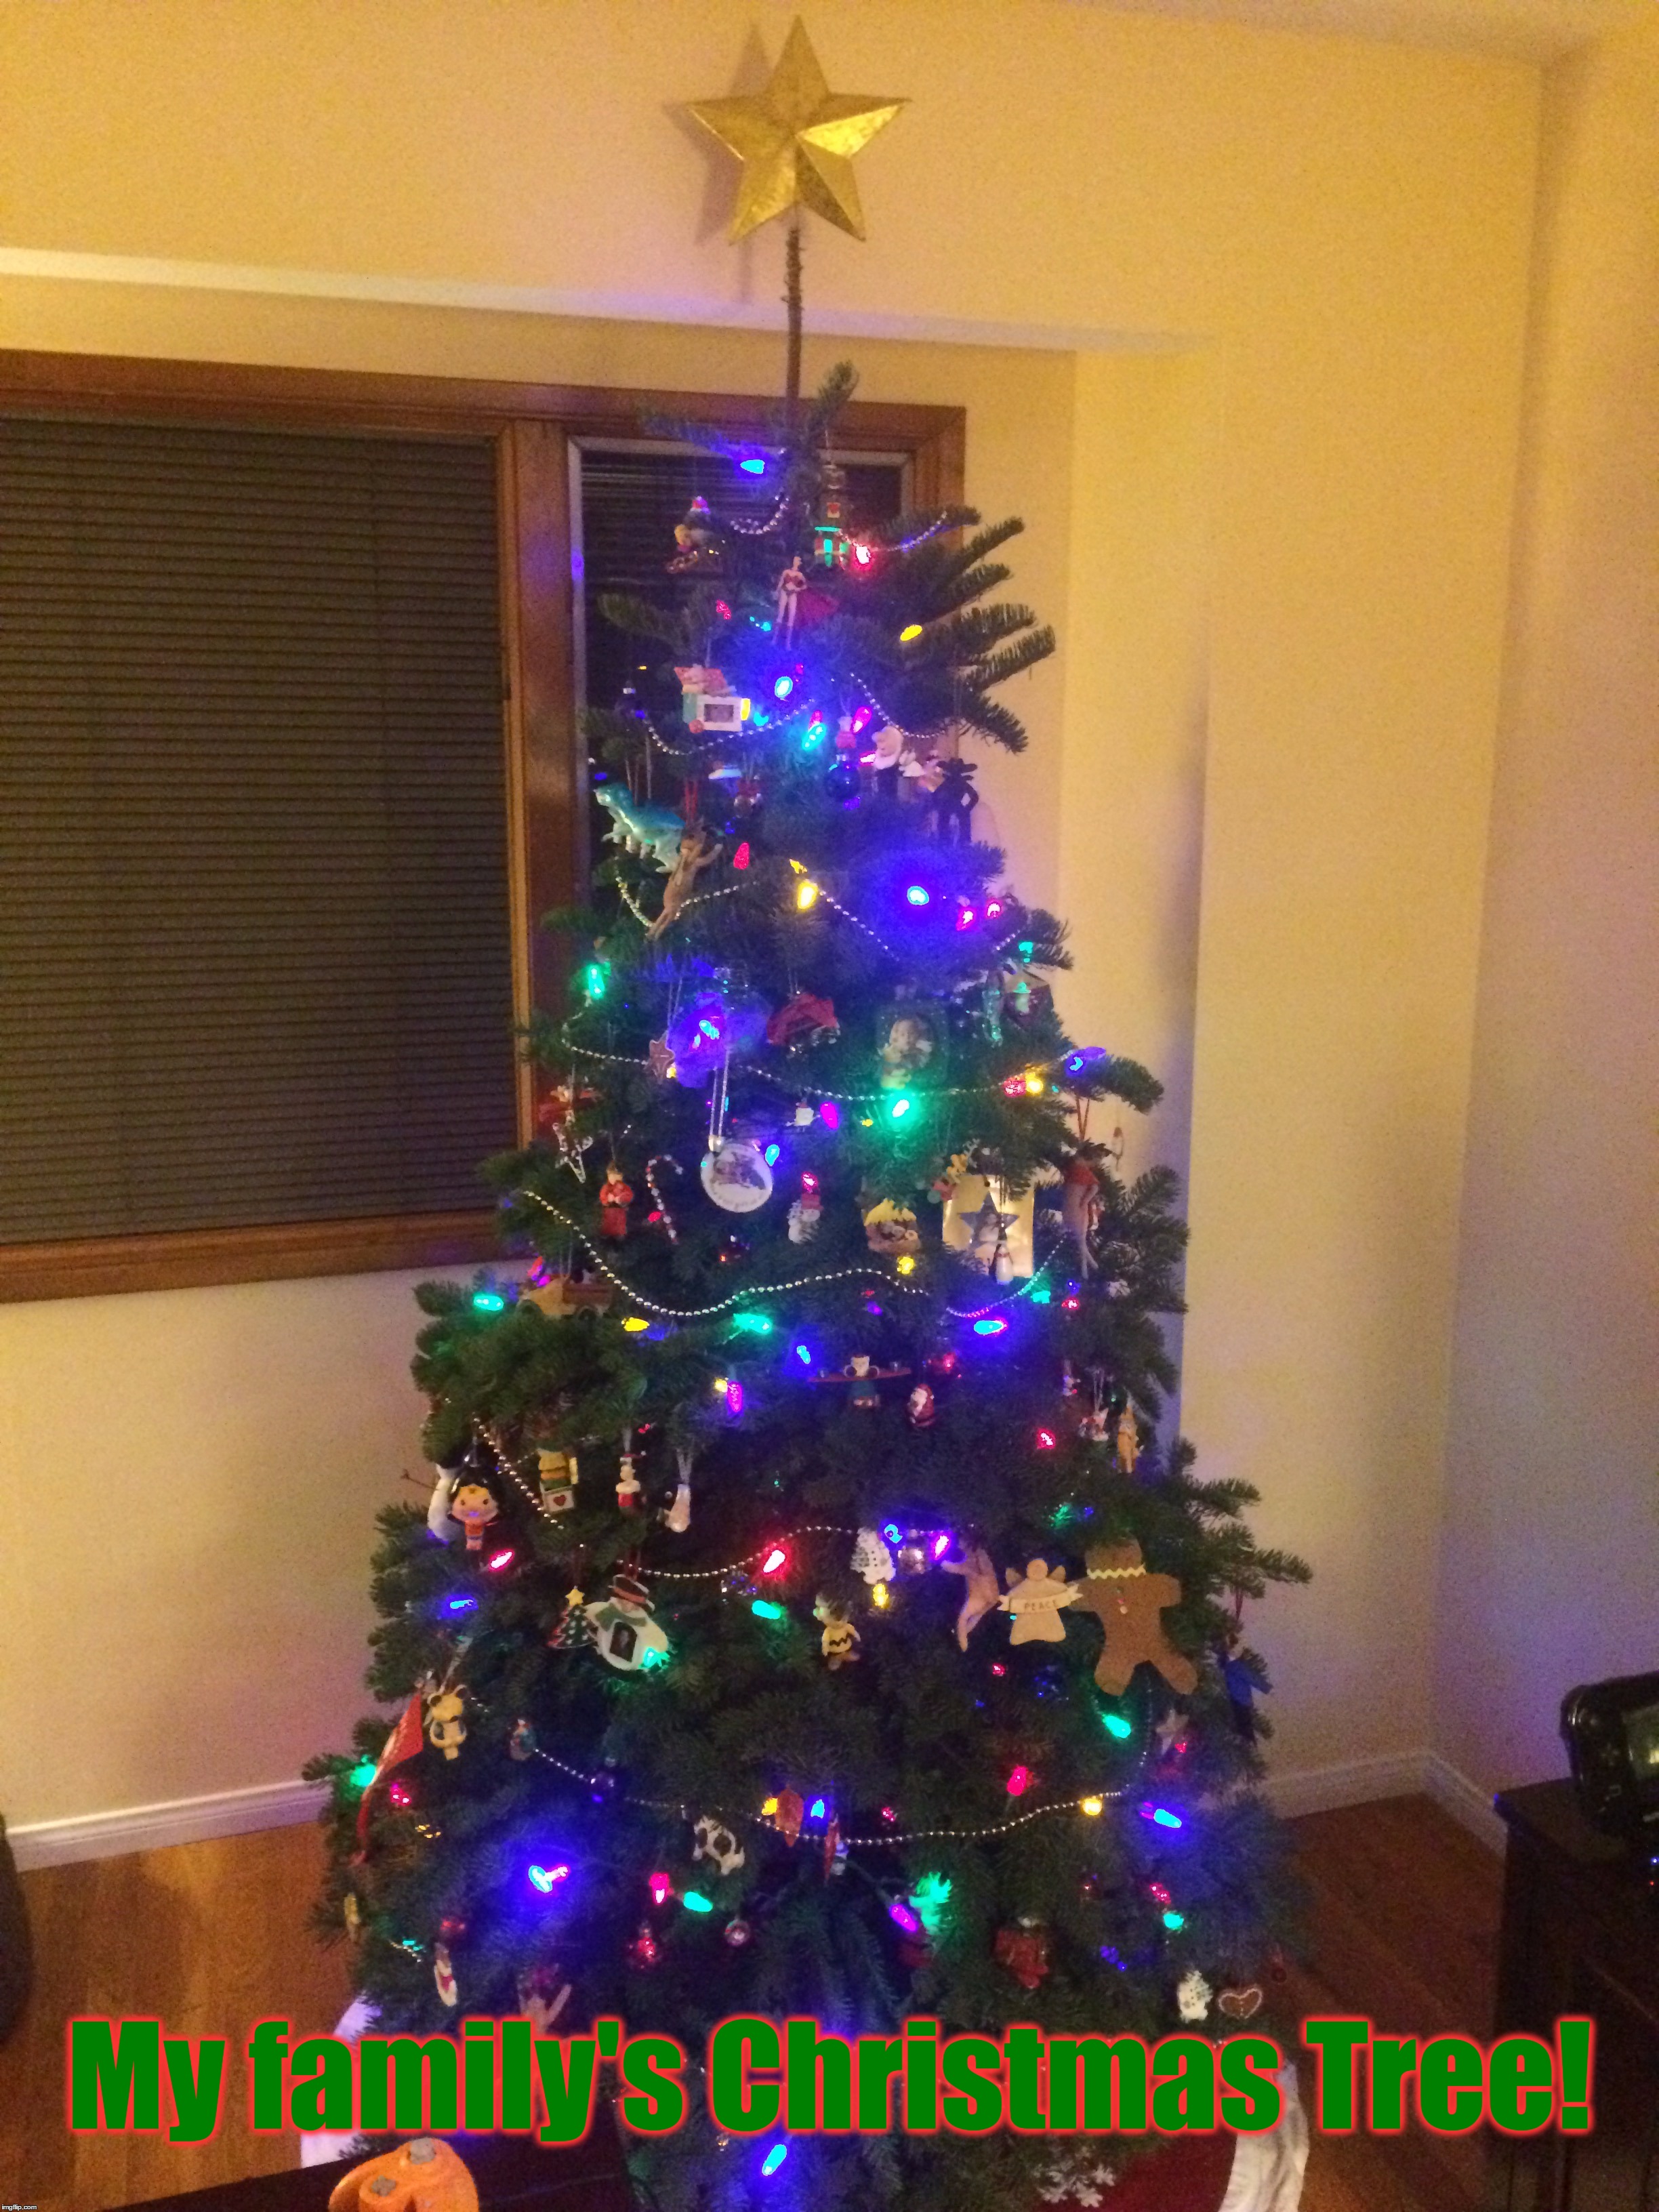 Like I Said, 13 Days Left Until Christmas... | My family's Christmas Tree! | image tagged in memes,christmas,christmas tree,funny,family,juicydeath1025 | made w/ Imgflip meme maker